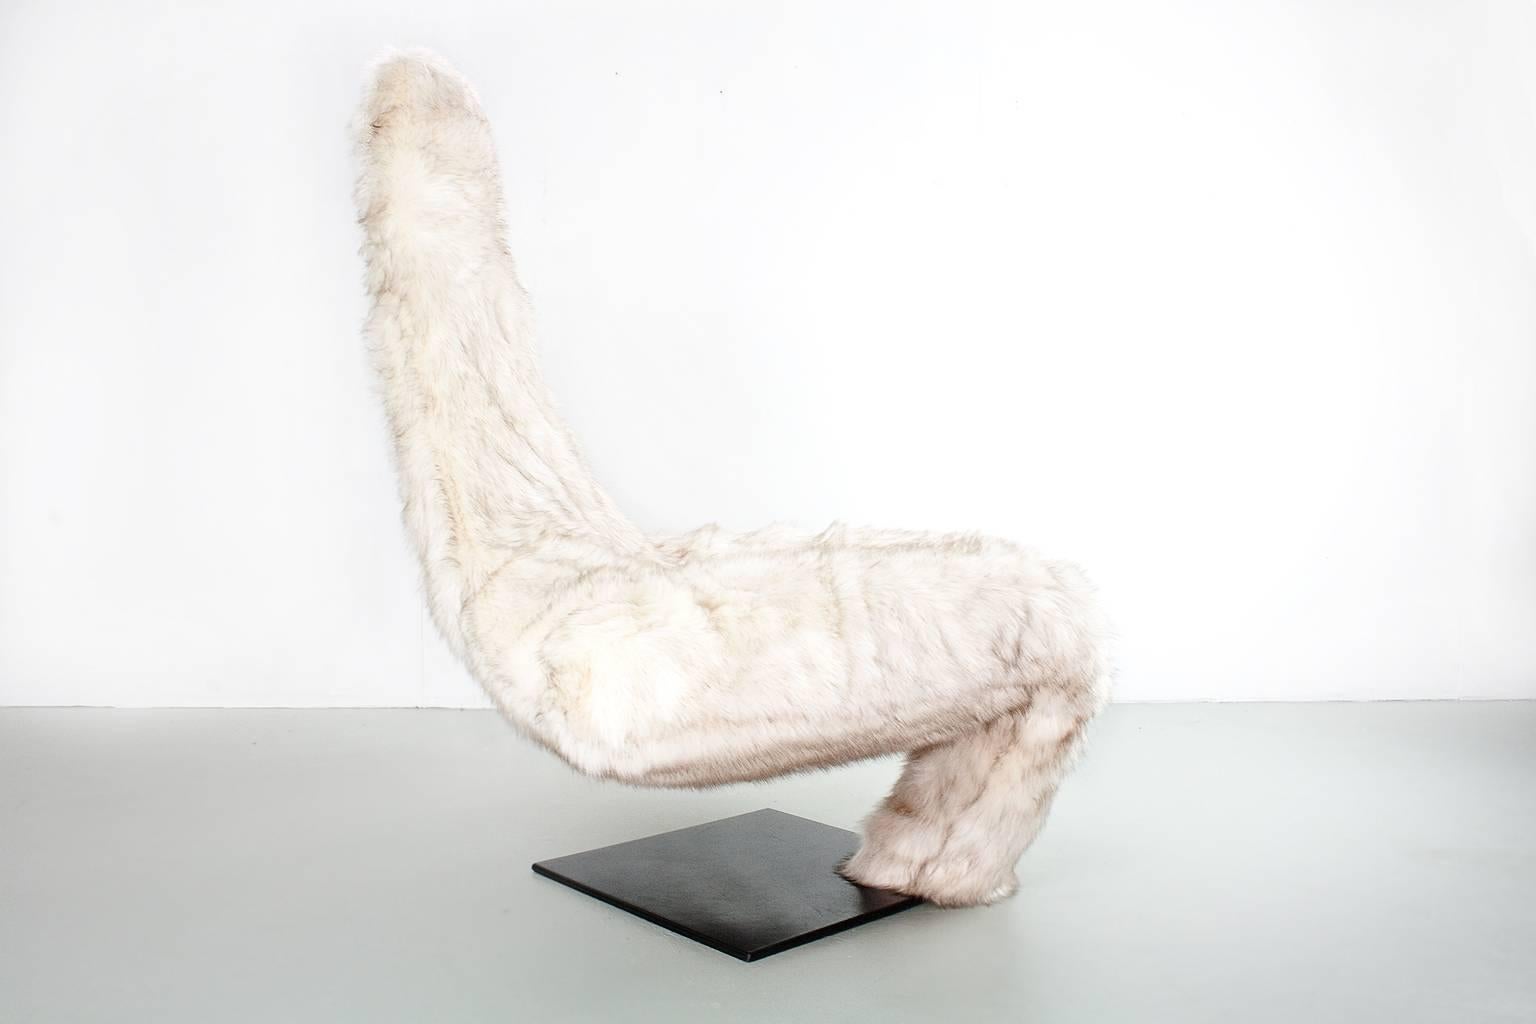 Limited edition 1982 'Turner' lounge chair, re-upholstered in a very high quality long haired faux fur (Siberian cream) on a black lacquered metal, heavy foot. The design has a high comfort. 

The chair was designed by Jack Crebolder for Harvink,